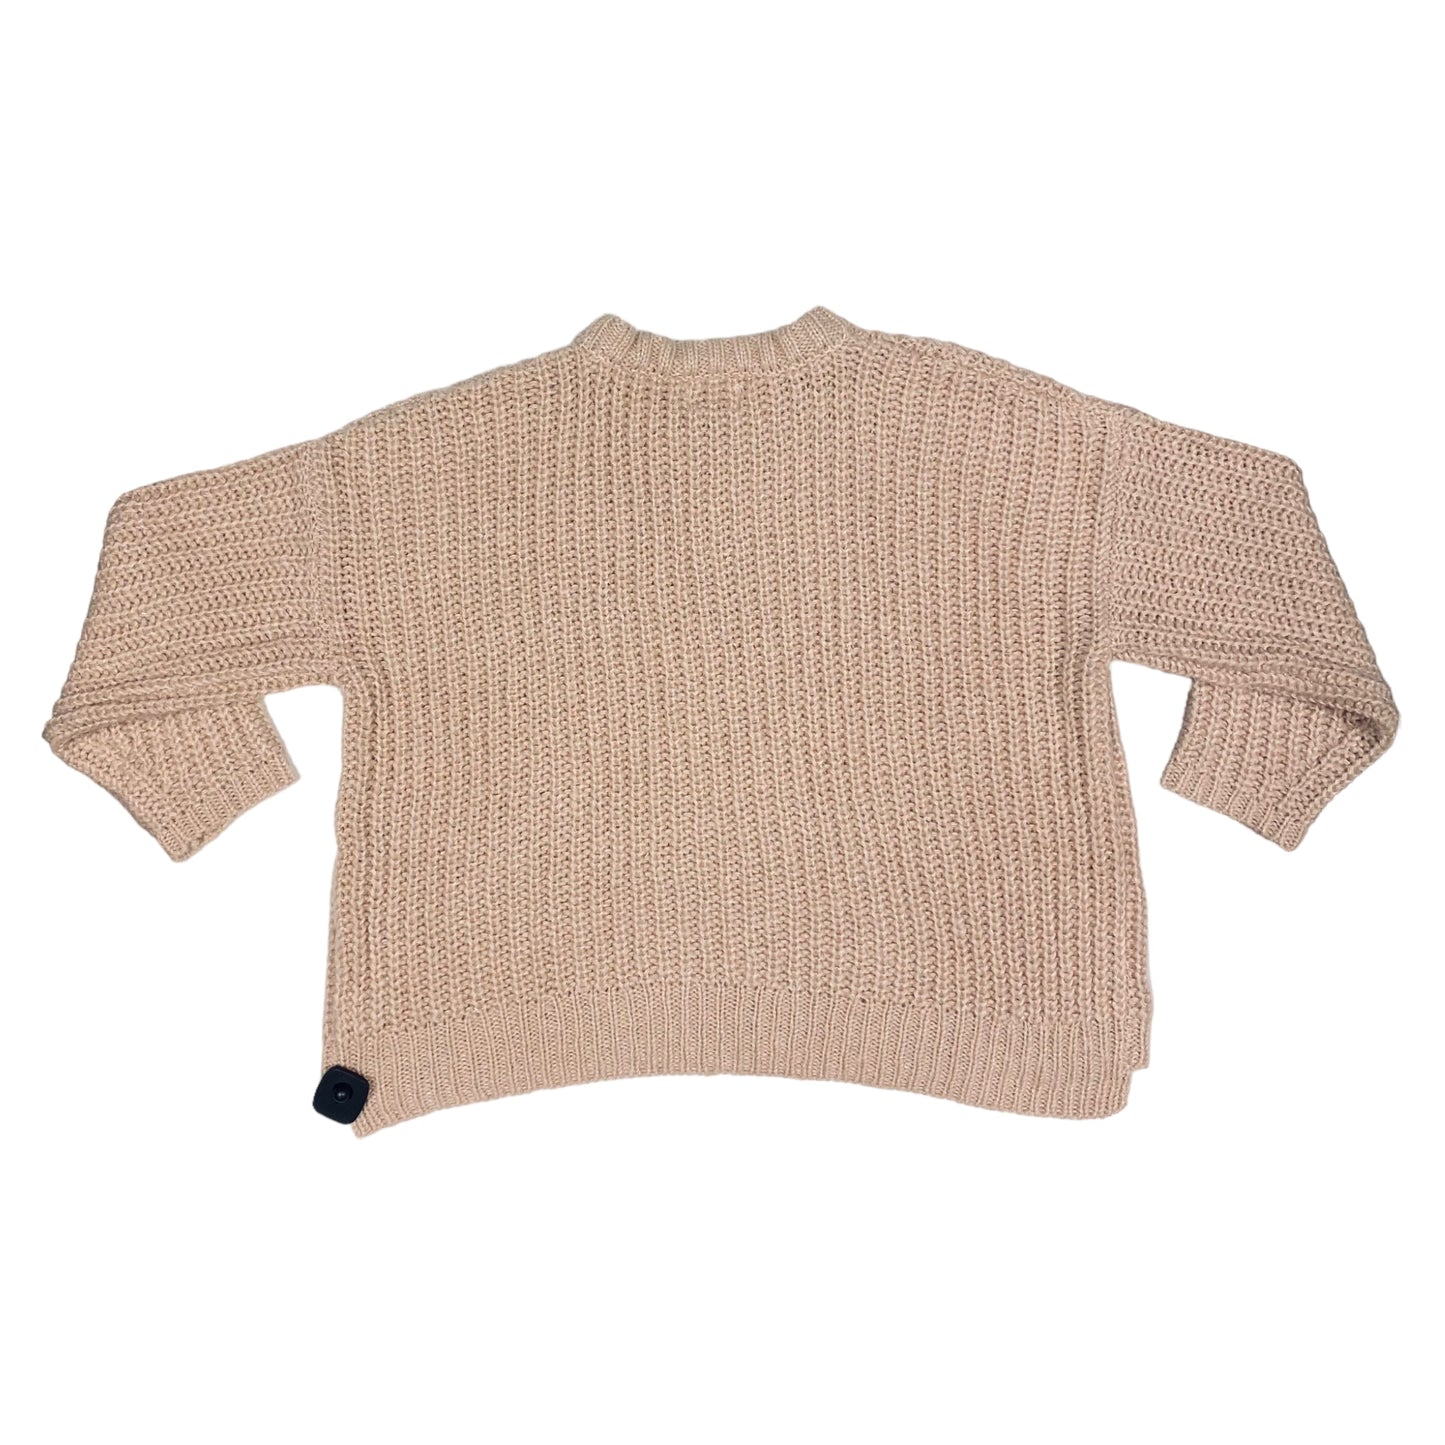 Sweater By A New Day  Size: 1x